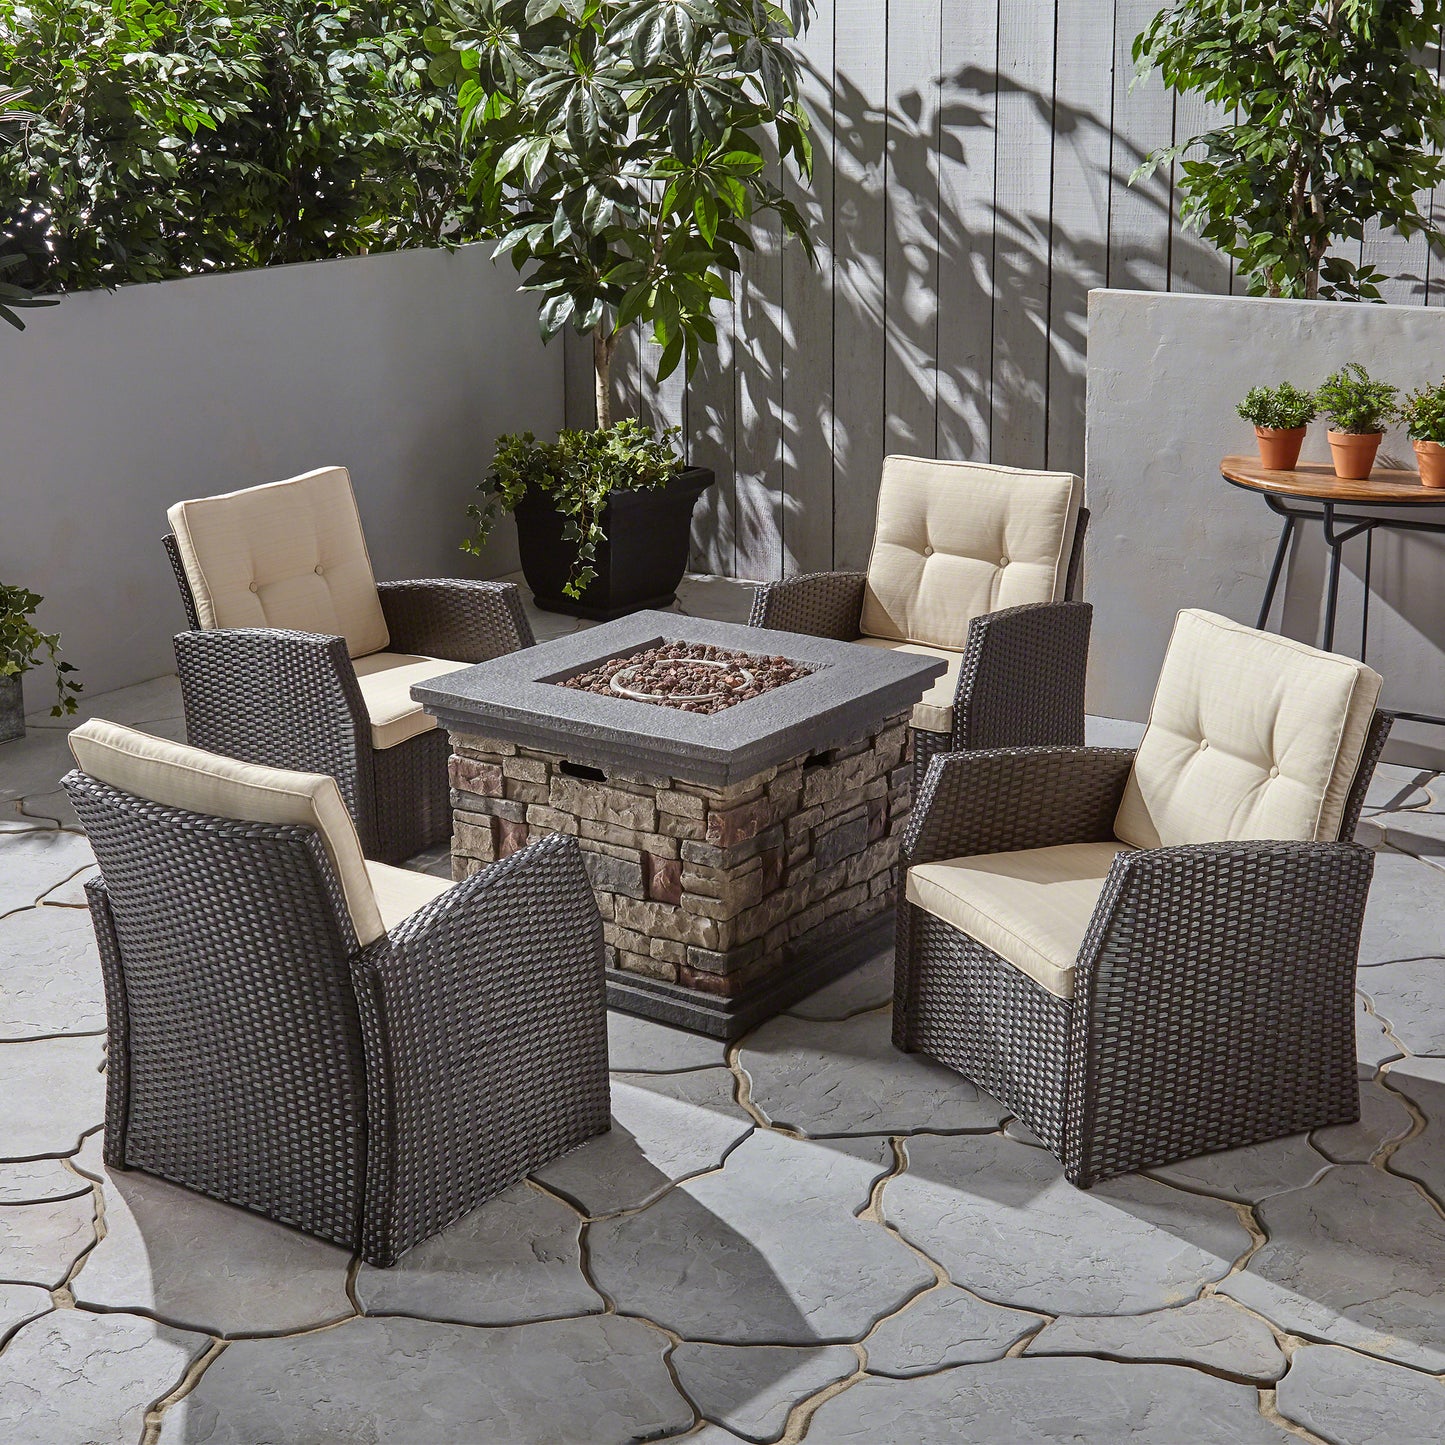 Brier Outdoor 4 Seater Wicker Chat Set with Fire Pit